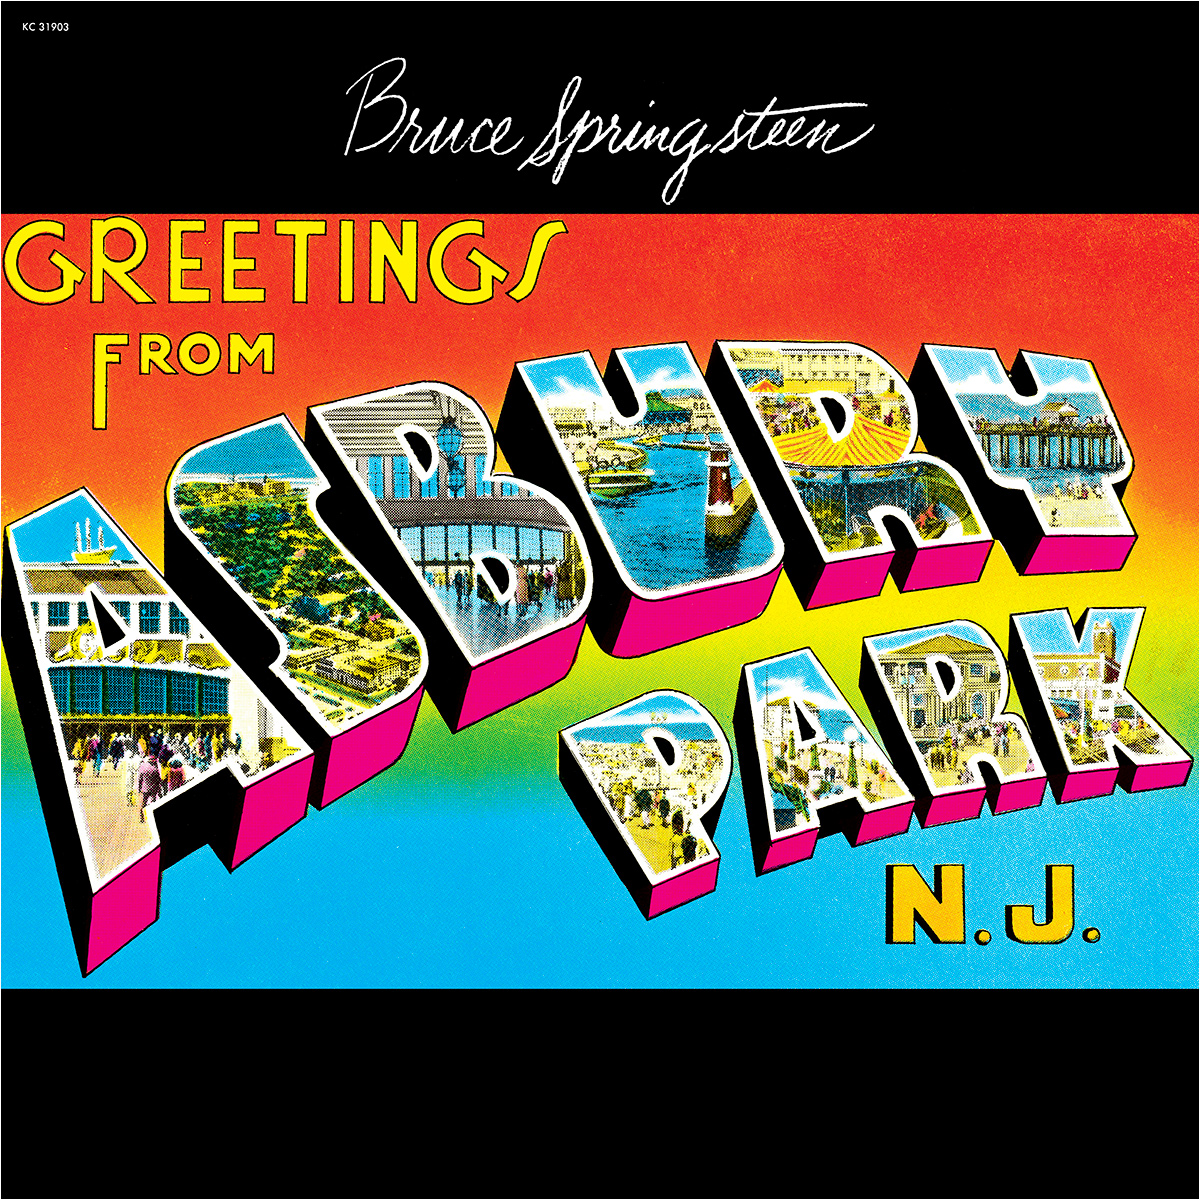 Bruce Springsteen Greetings from Asbury Park, N.J. front cover